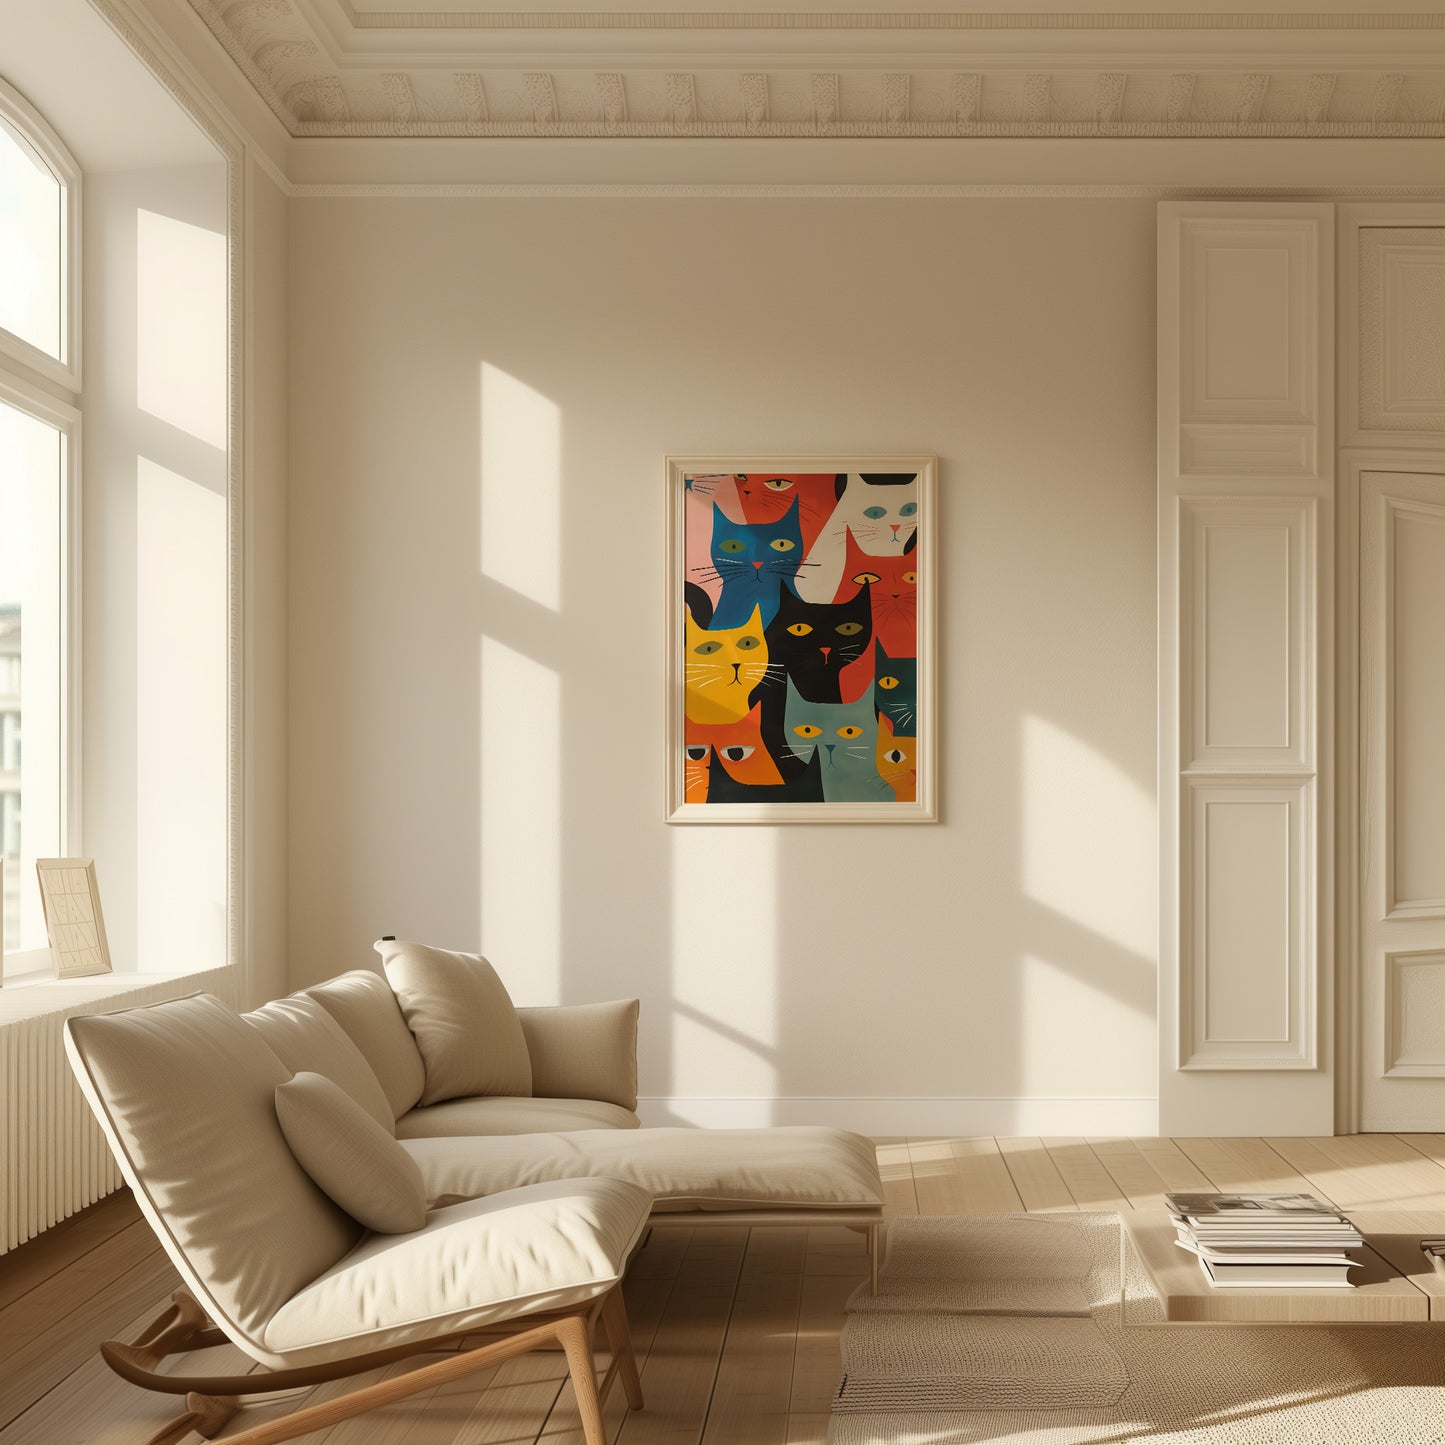 Elegant living room with a colorful abstract cat painting on the wall, a beige sofa, and sunlight streaming in.